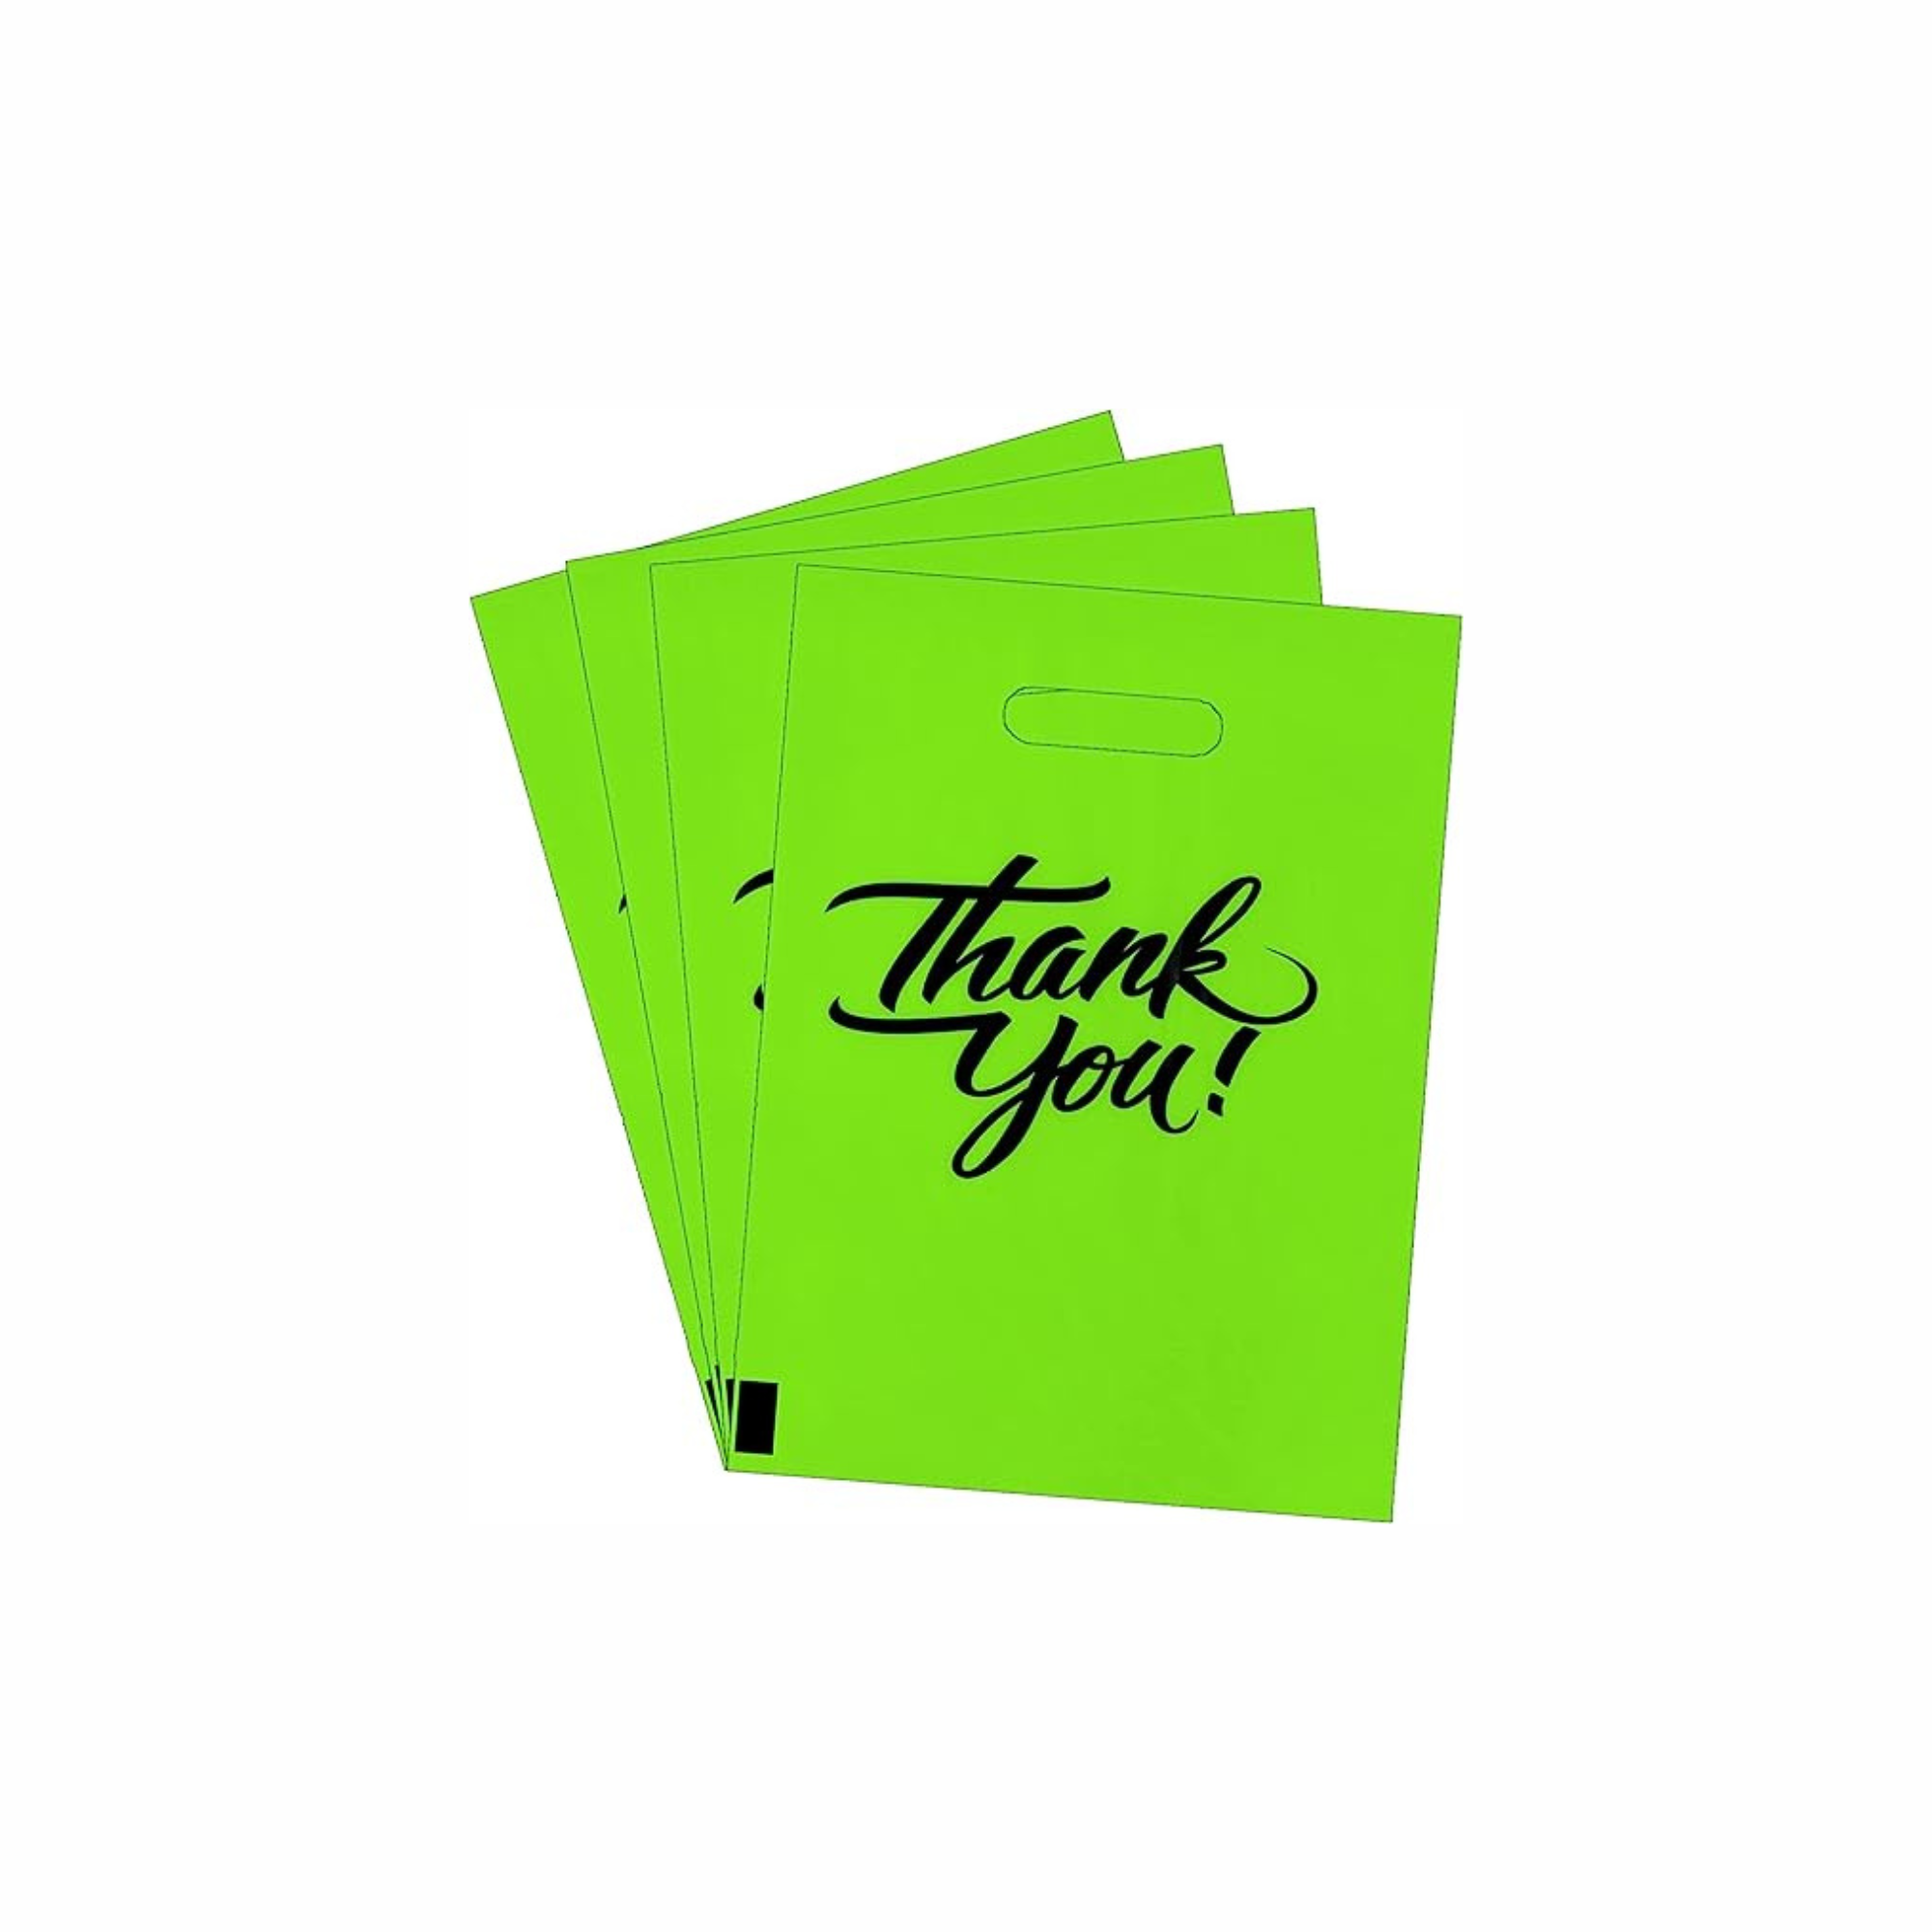 9 x 12 Thank You Bags Bulk (Pack of 100) with Die Cut Handles, Retail Thank You Shopping Poly Bags - Infinite Pack